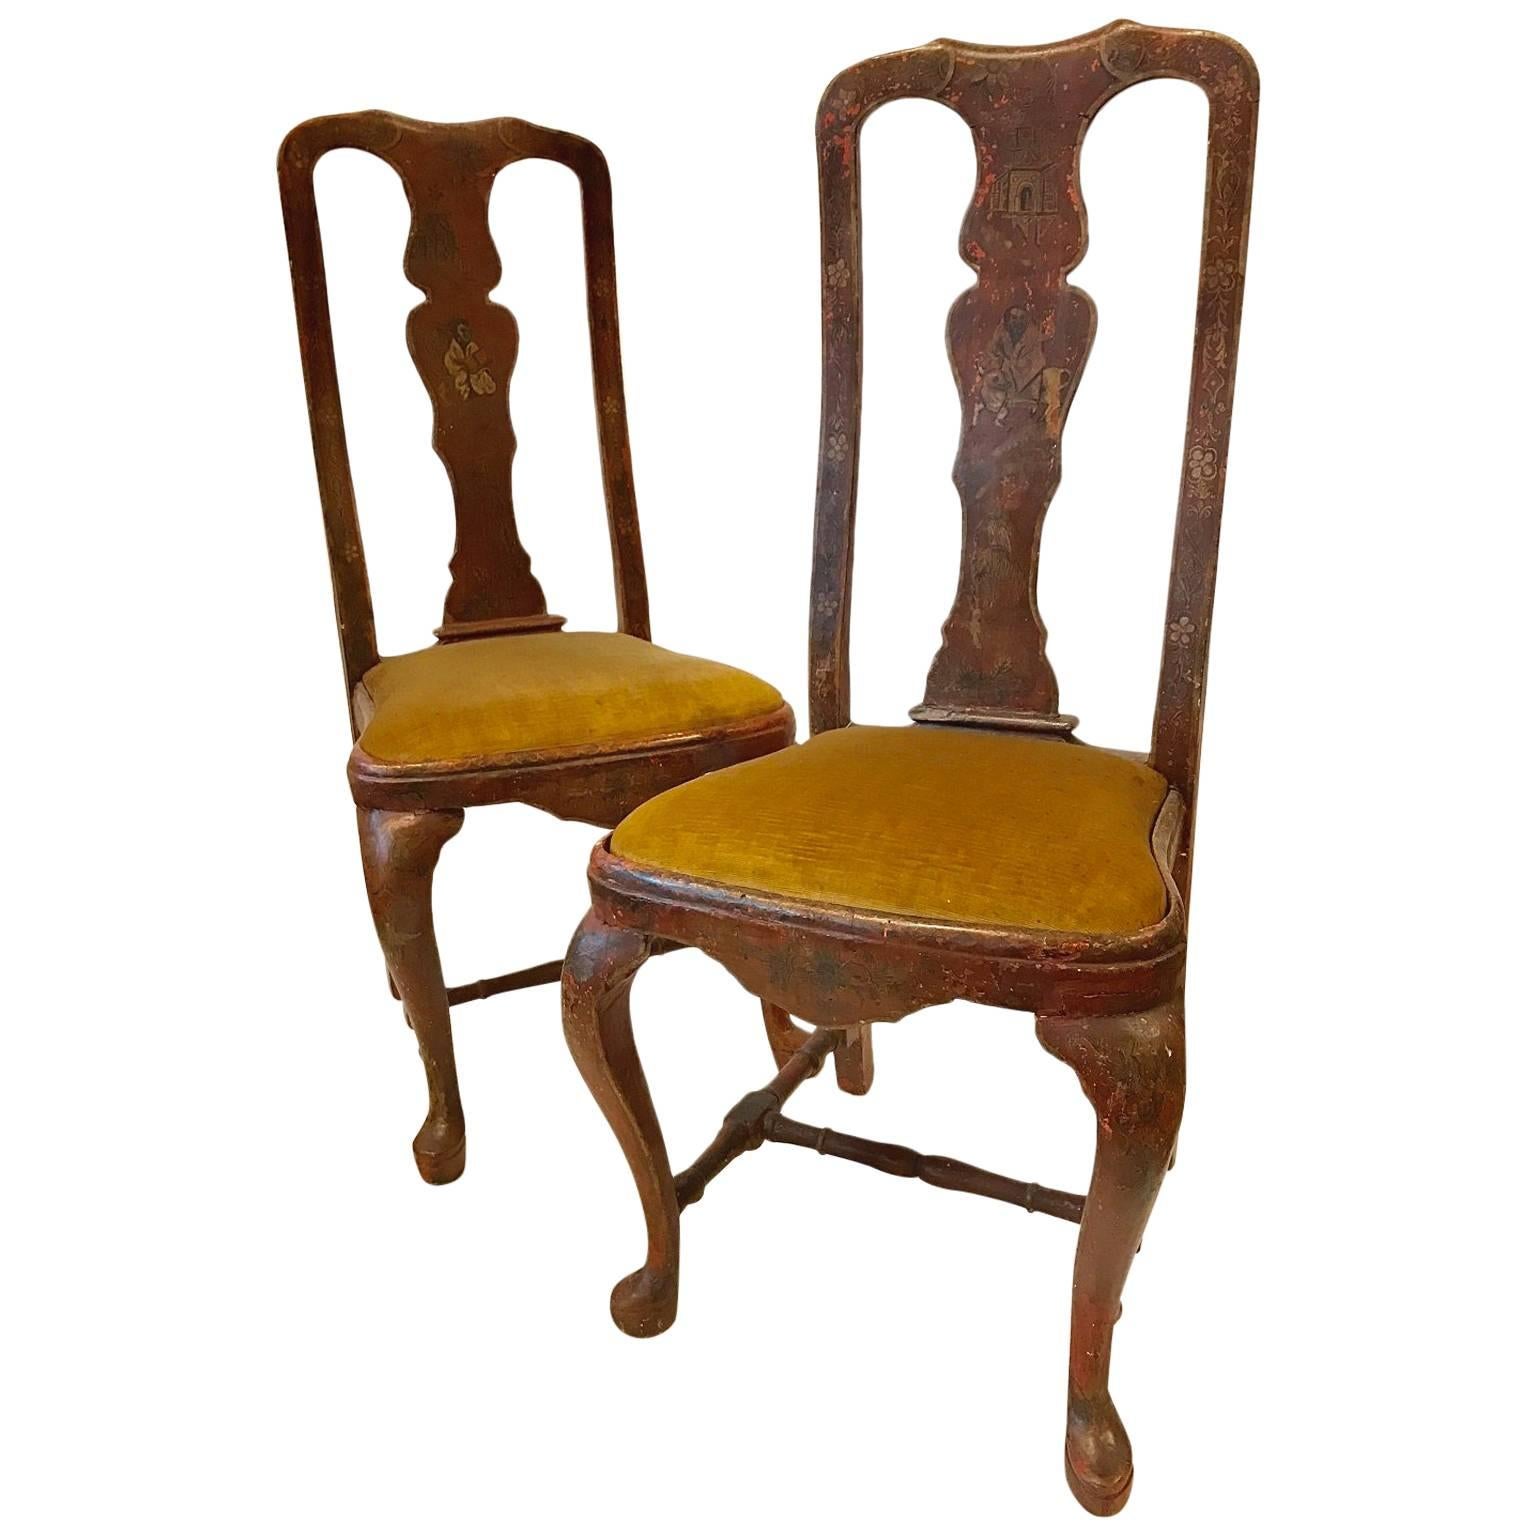 Pair of Chinoiserie Painted Italian Chairs, Late 18th Century For Sale